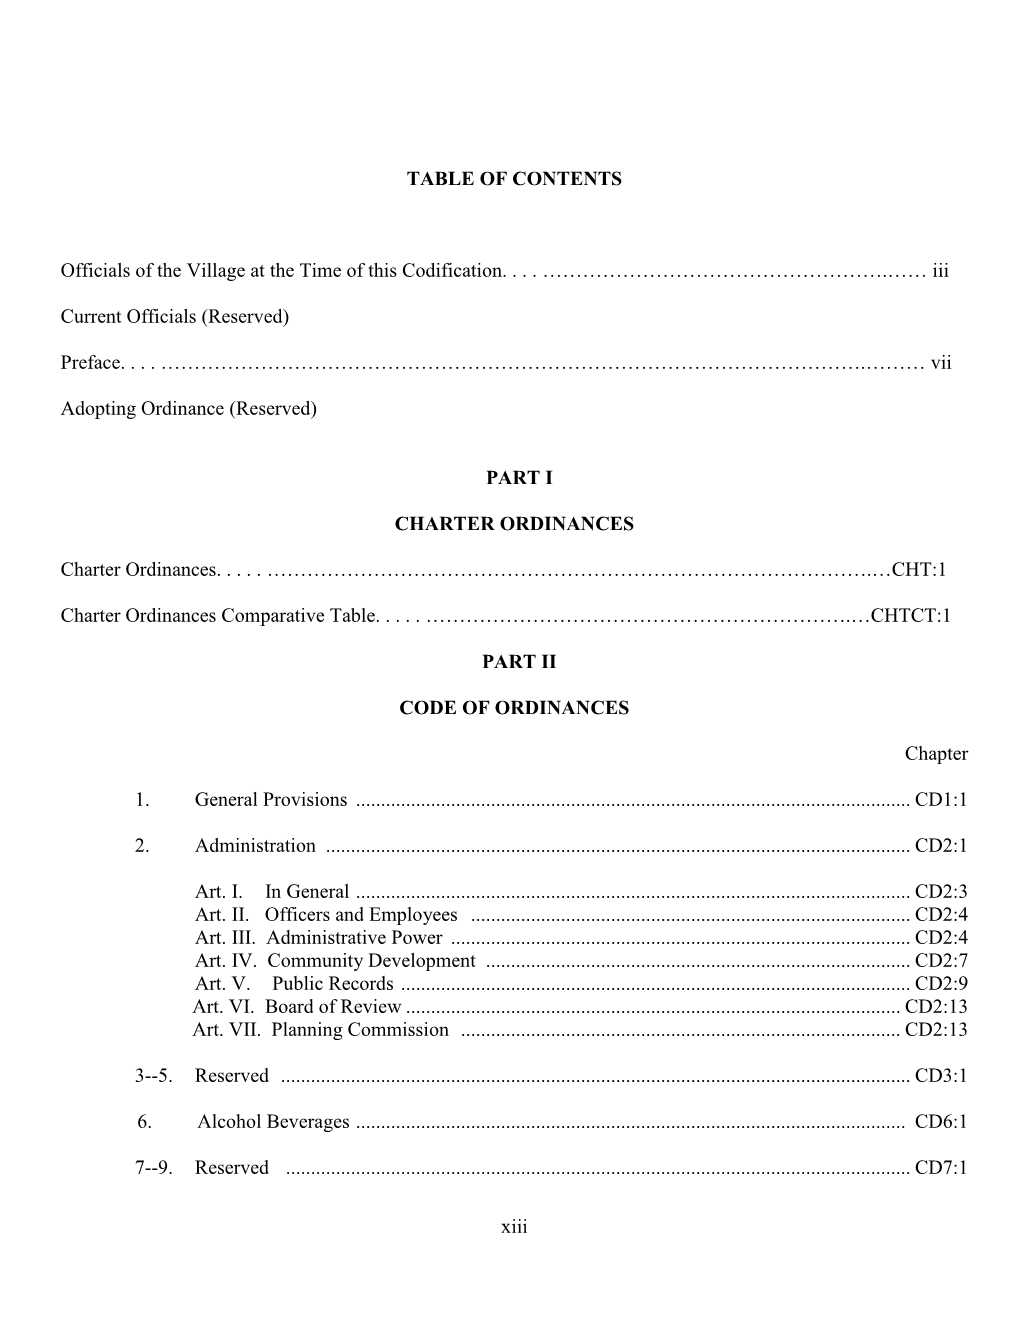 Xiii TABLE of CONTENTS Officials of the Village at the Time of This Codification